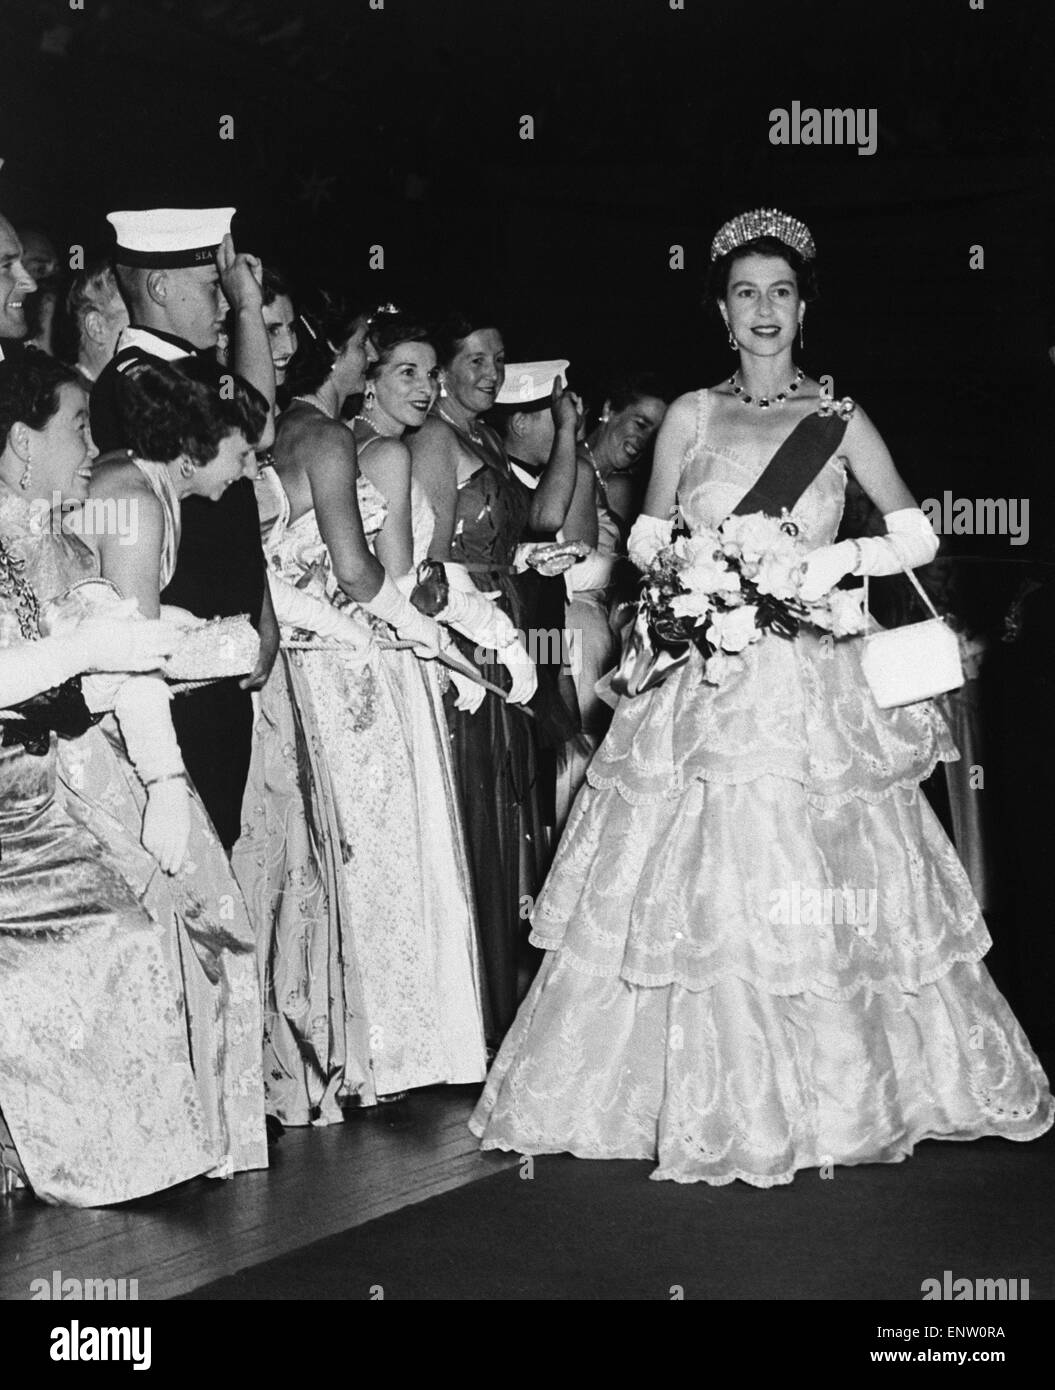 Queen Elizabeth II Visits Tasmania 1954. The Queen in all her glory made her regal entry to the Hobart City Hall, Tasmania, for the Civic Ball. March 1954. Stock Photo